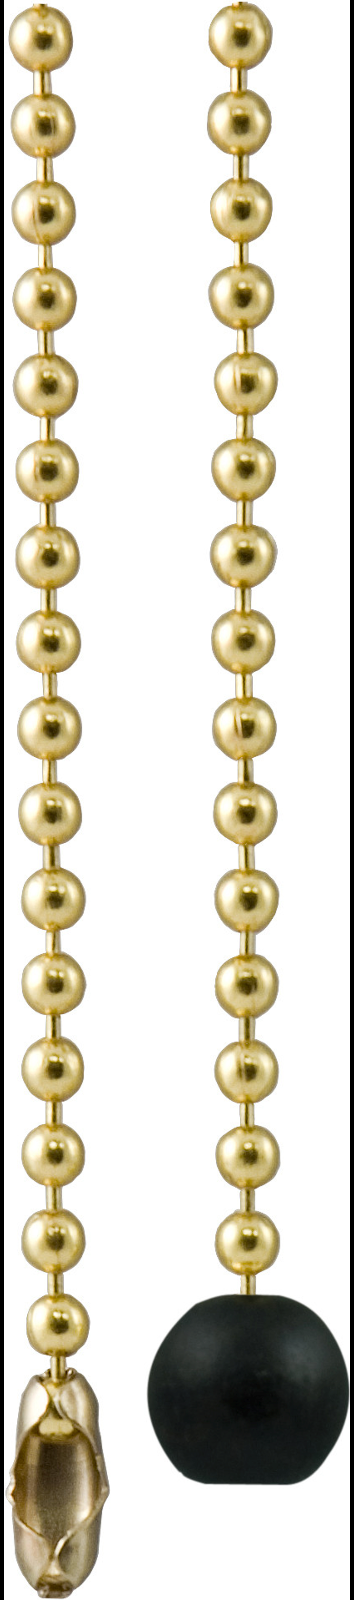 Wooden Ball PULL + 36" Polished Brass beaded chain #6 Ball w/ connector GE 54433 - $14.18